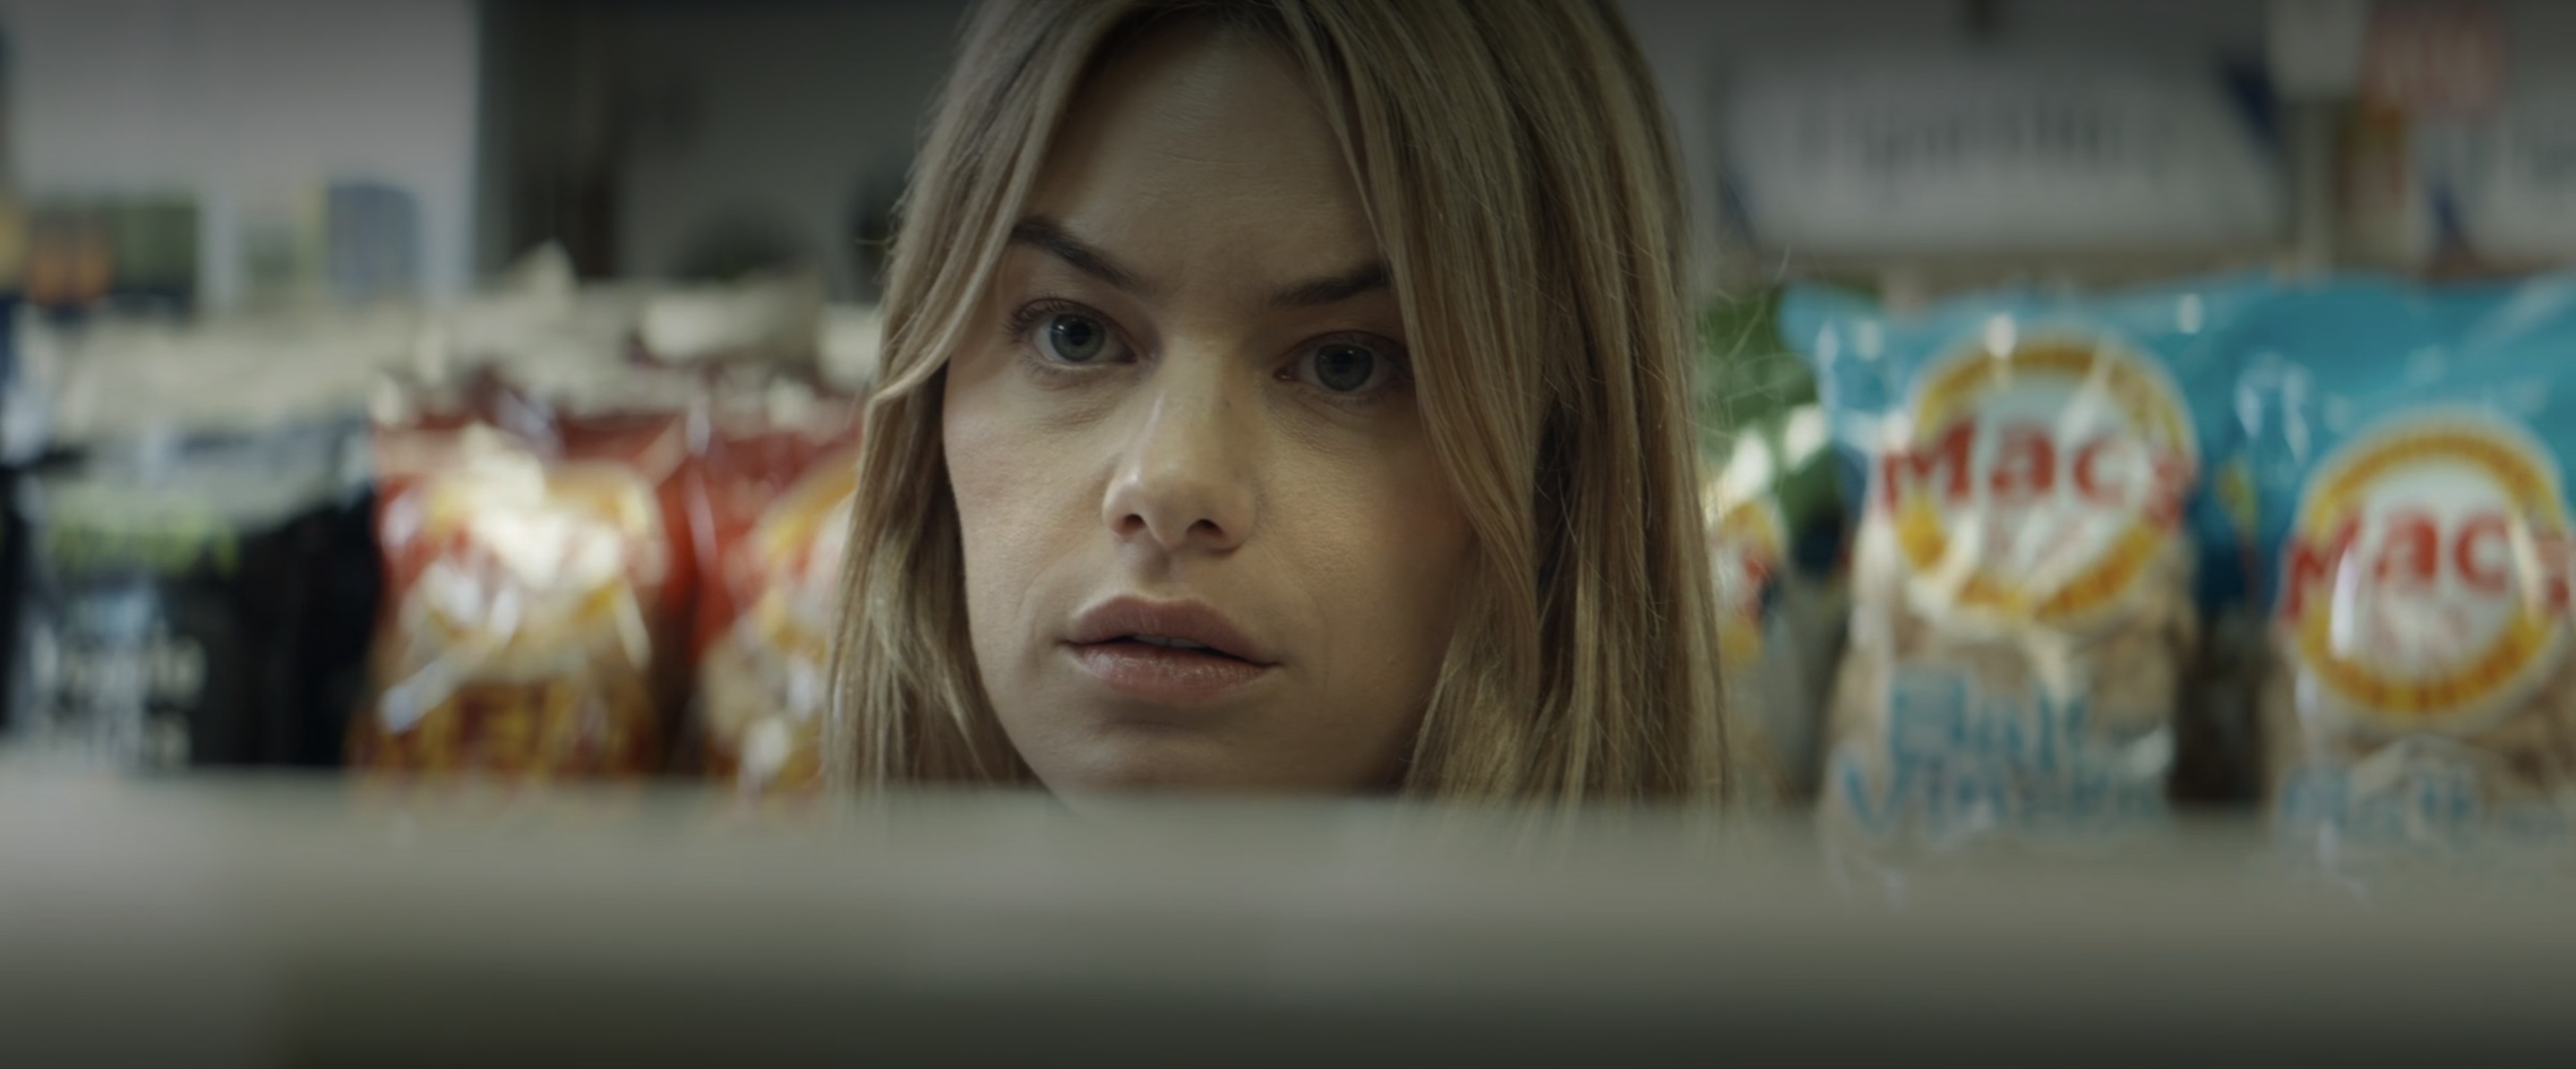 Night of the Hunted Cast on Shudder - Camille Rowe as Alice